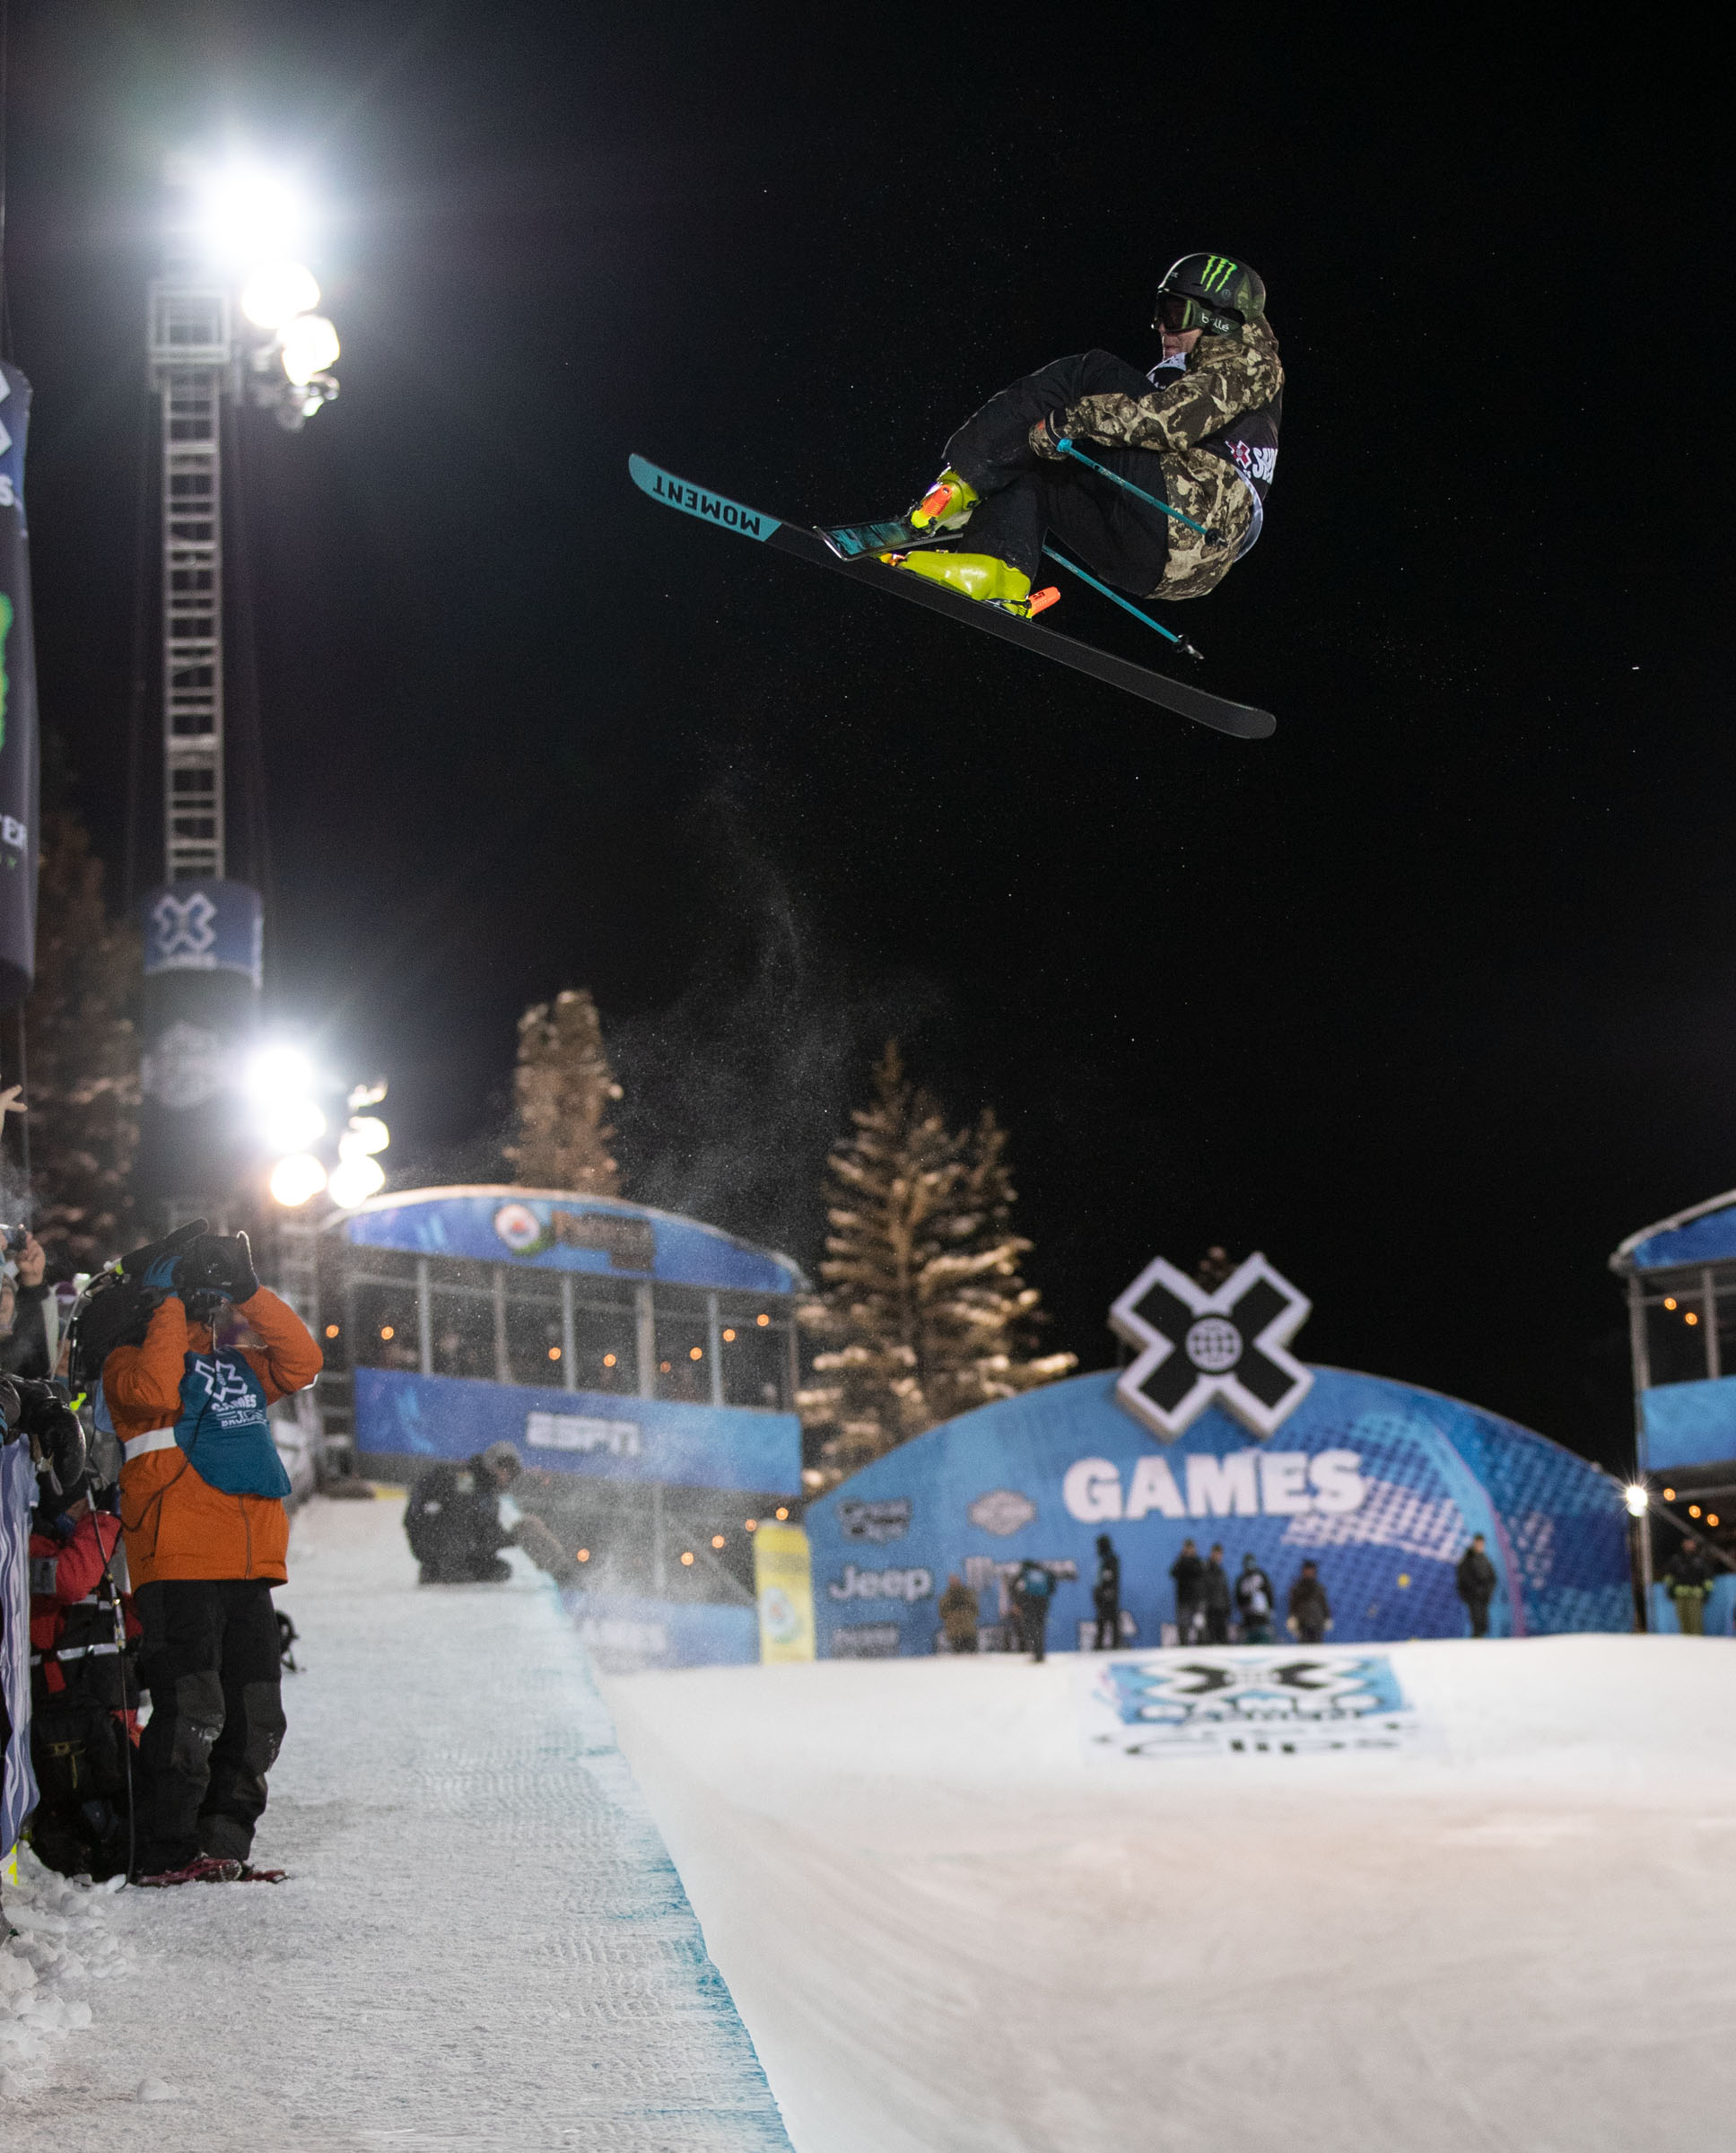 Monster Energy's David Wise Takes Silver in Men's Ski SuperPipe at X Games Aspen 2019